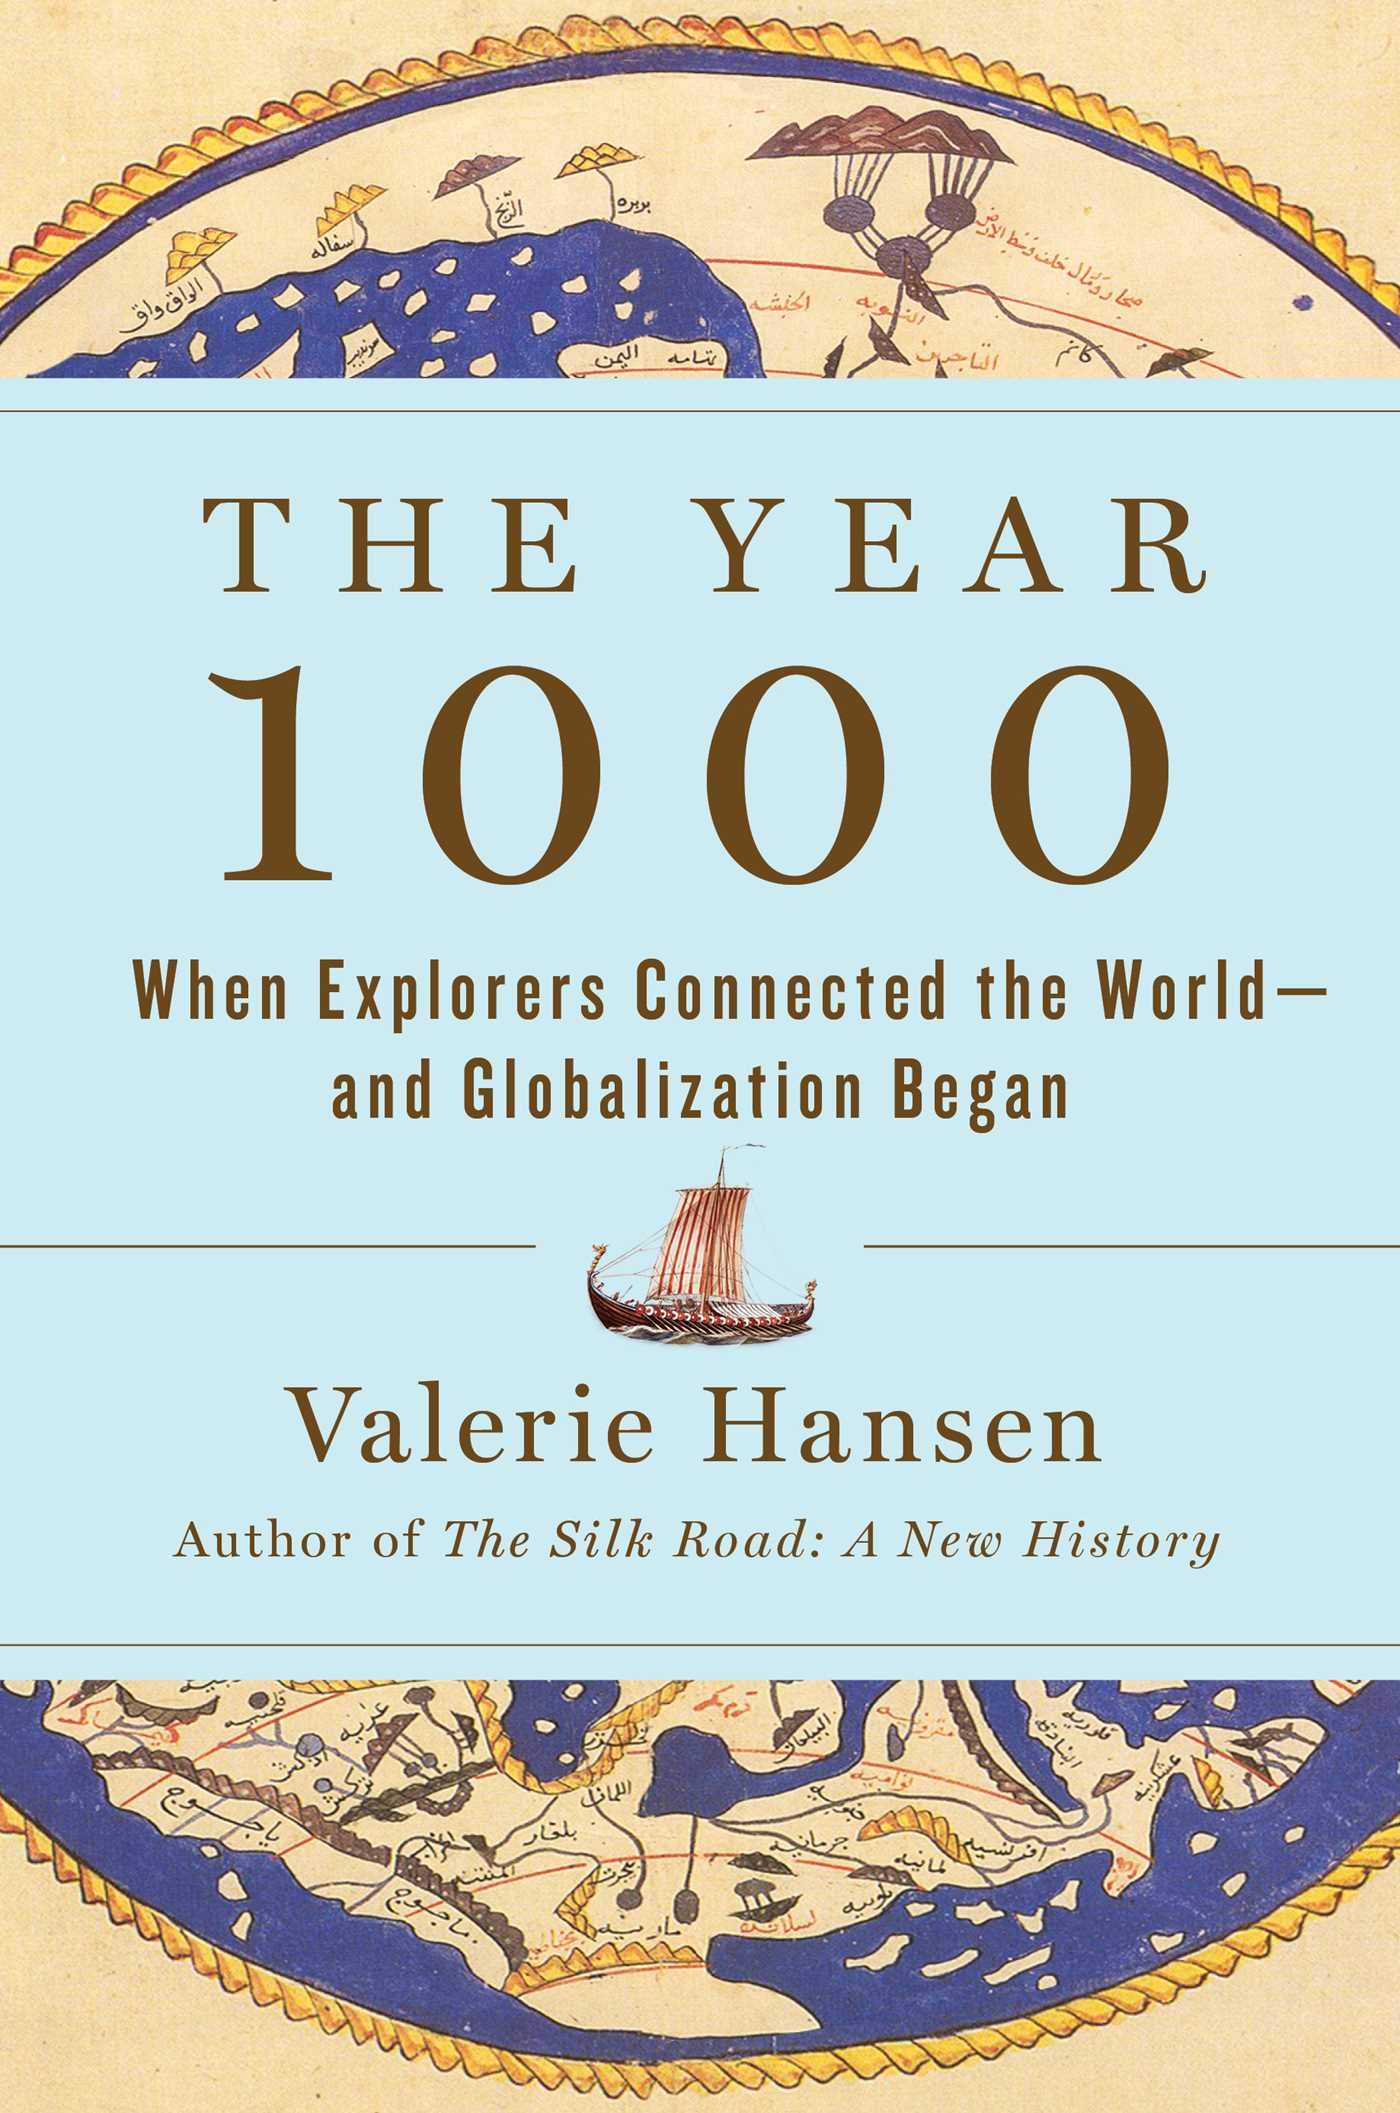 The Year 1000: When Explorers Connected the World_and Globalization Began